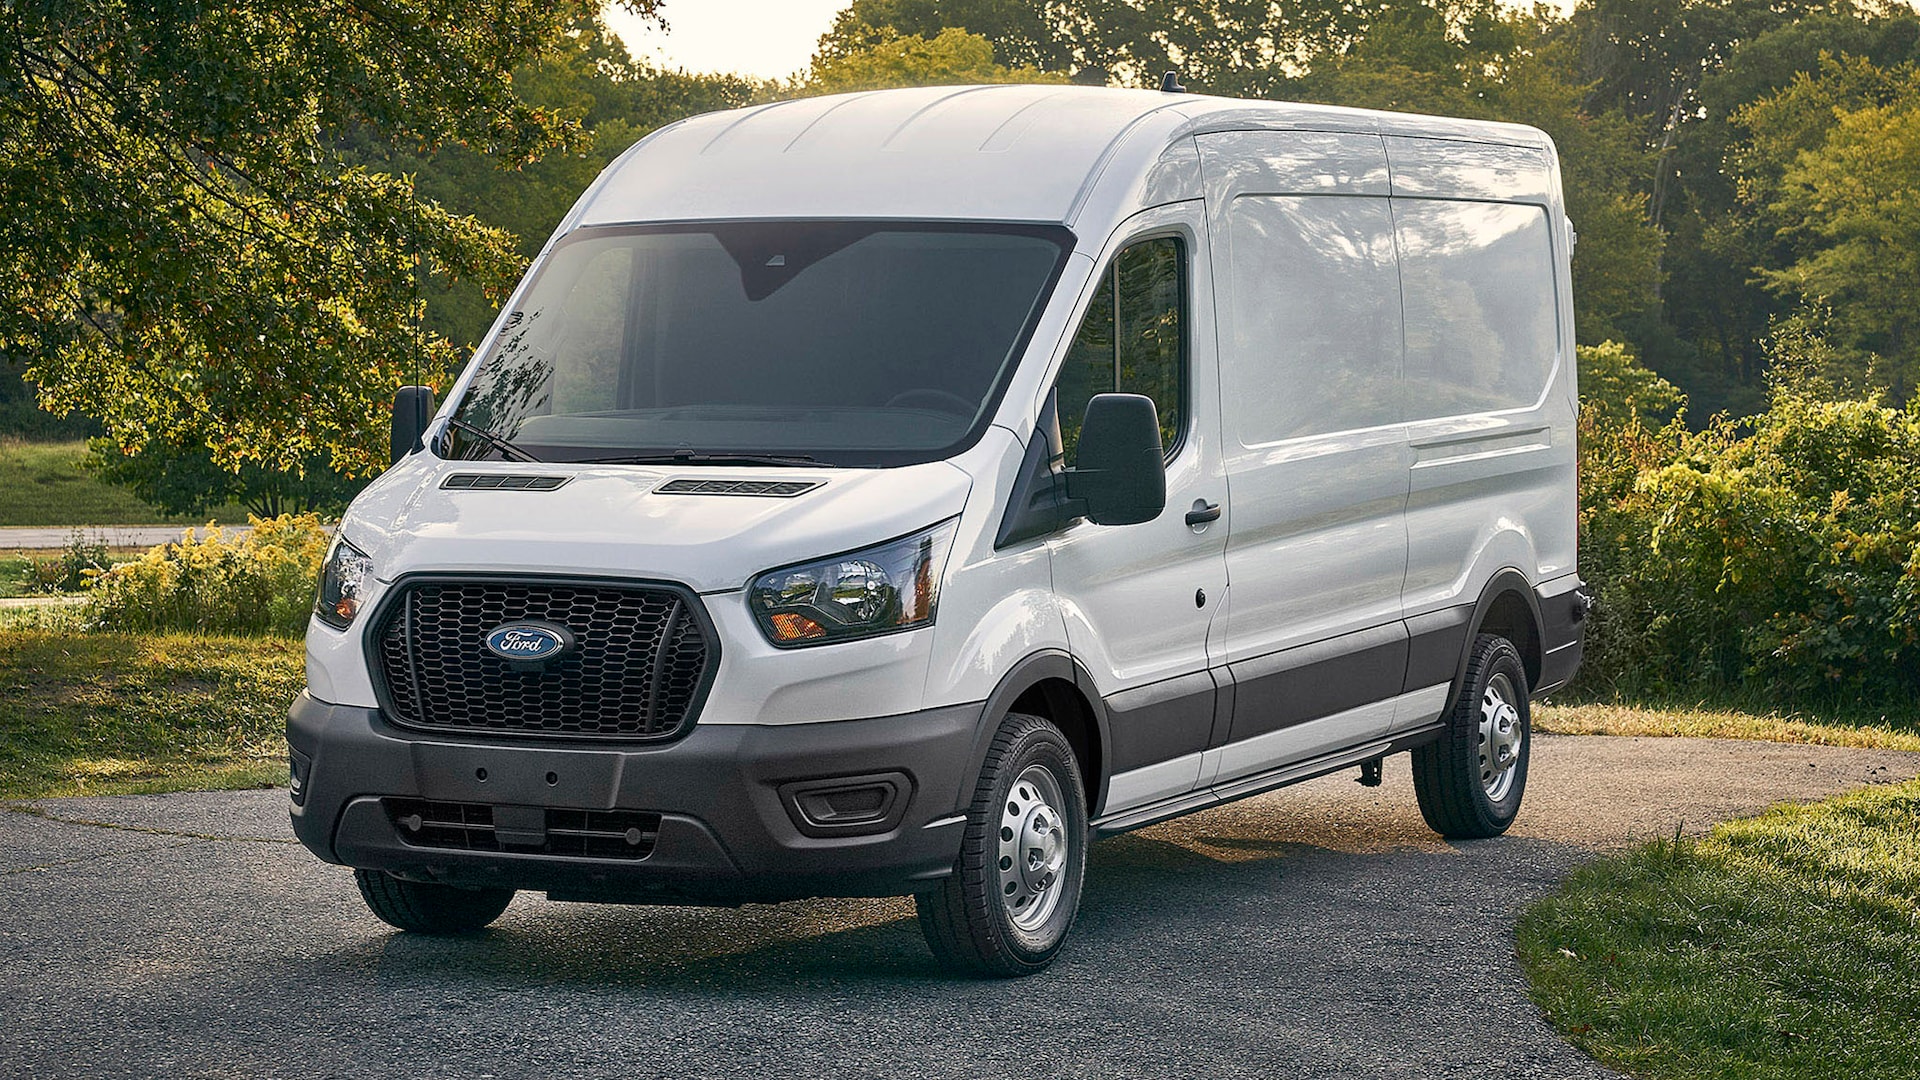 2022 FORD TRANSITLOWROOF15PASS Vehicle Details